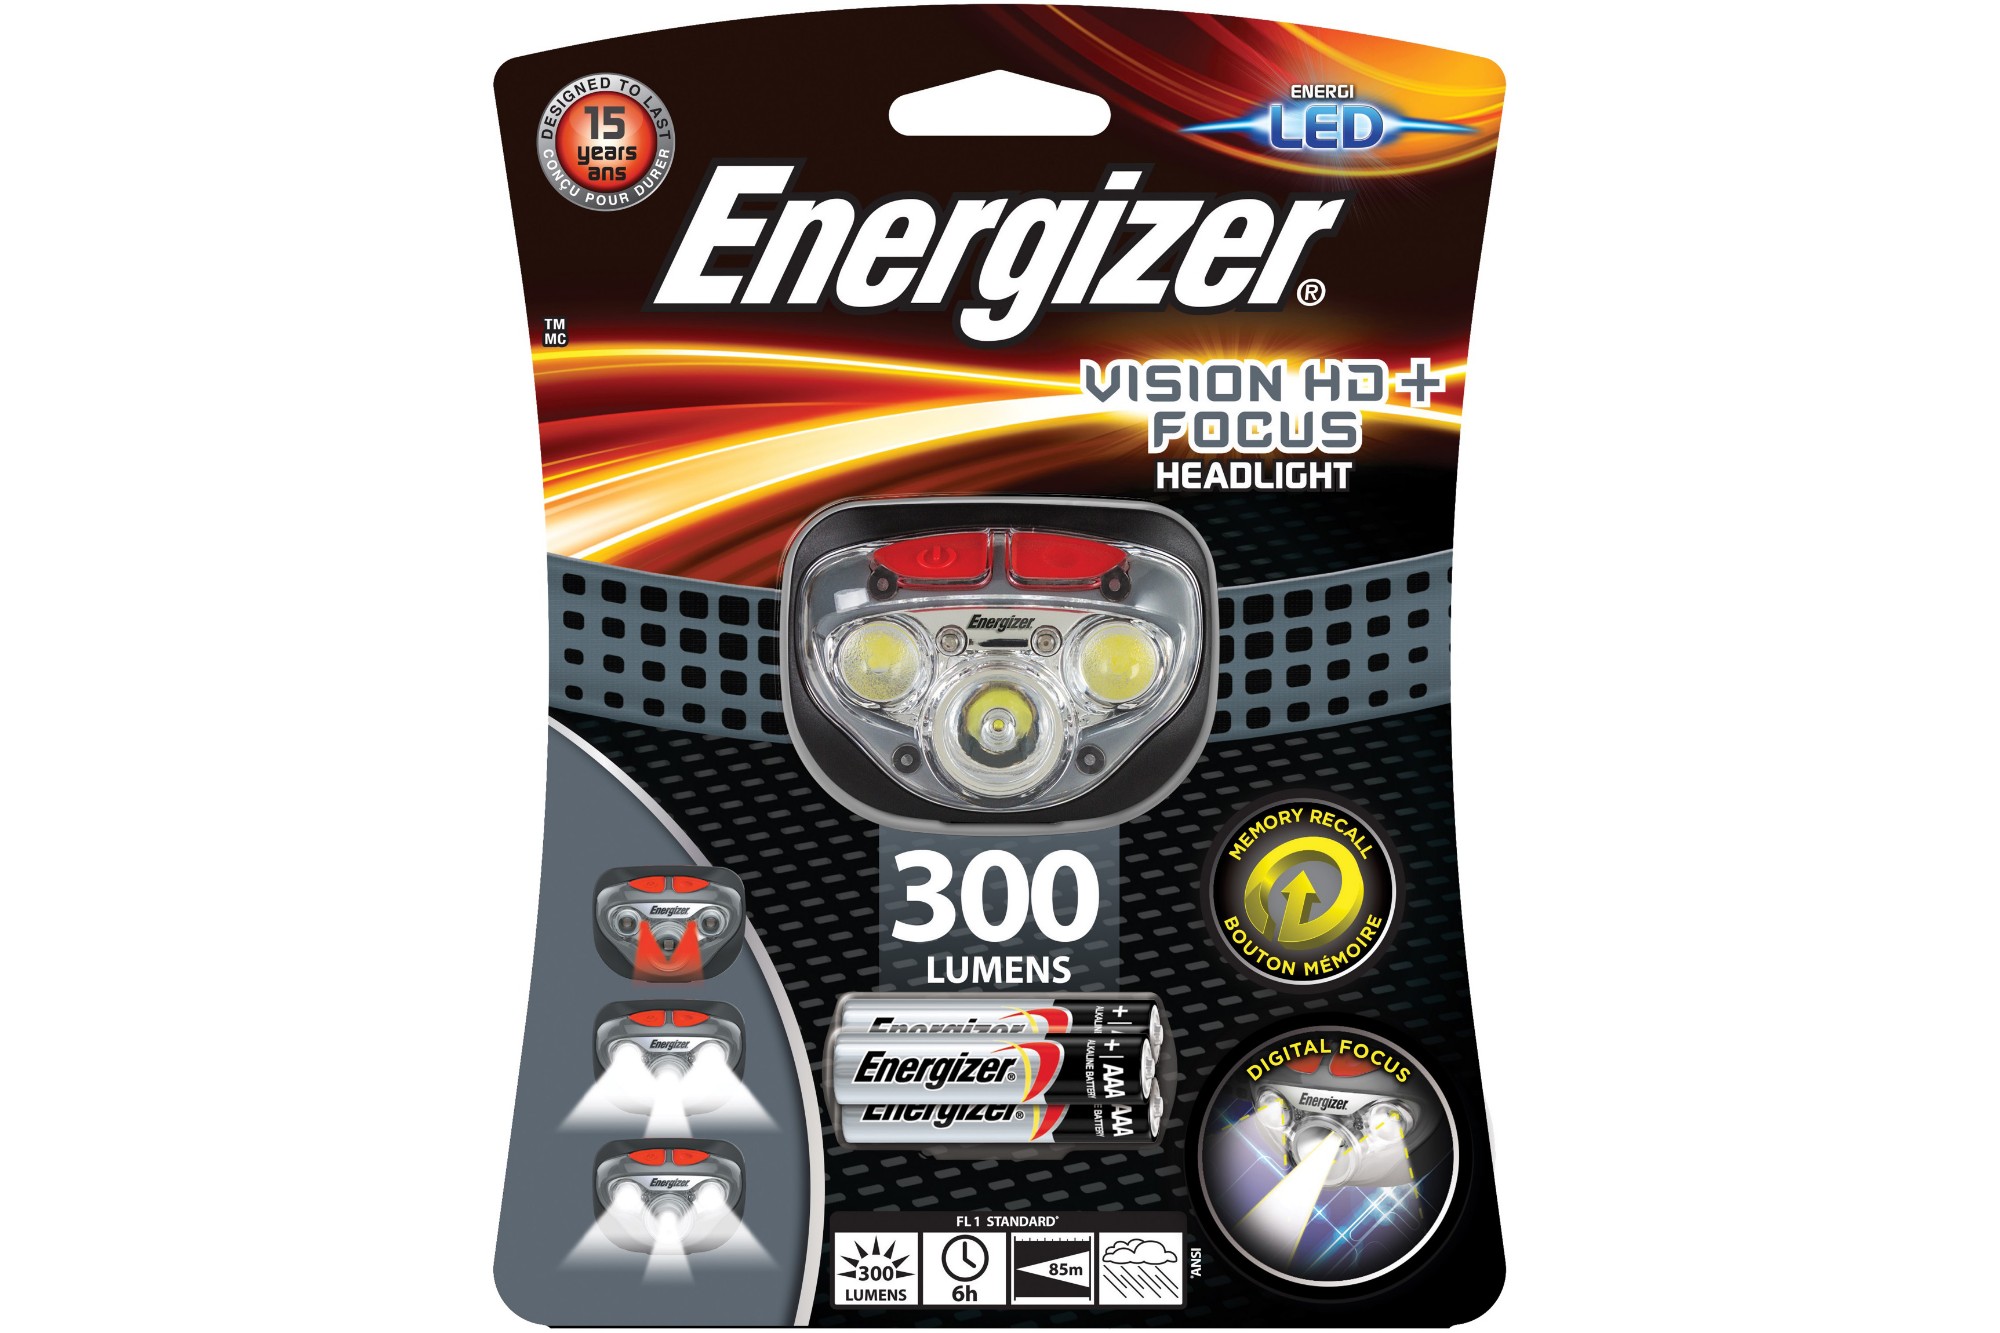 E300845800 ENERGIZER Vision HD+ Focus LED Head Torch with 3x AAA Batteries